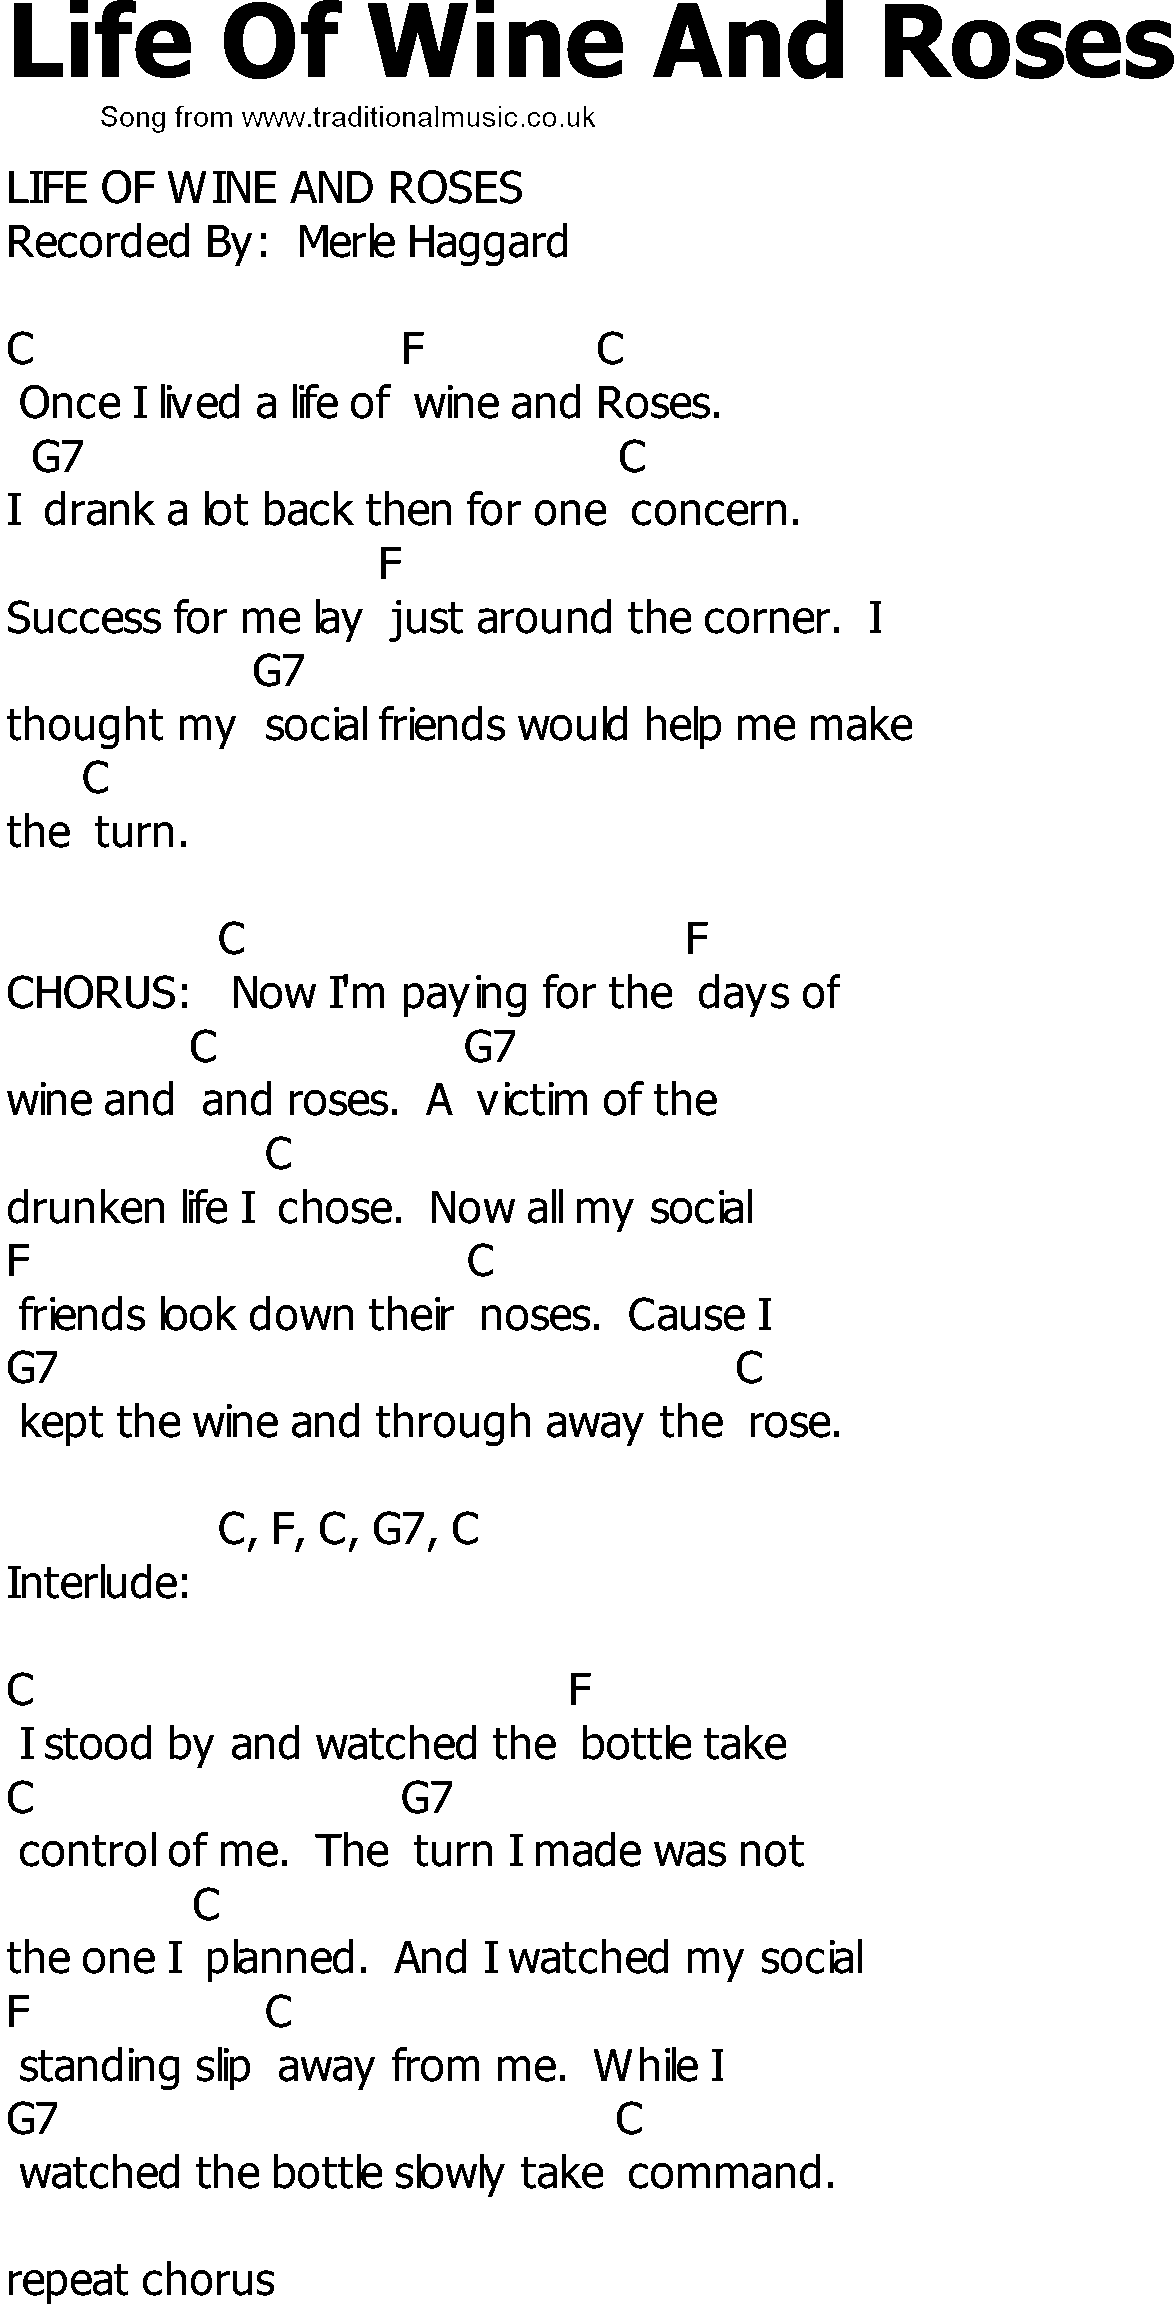 Old Country song lyrics with chords - Life Of Wine And Roses